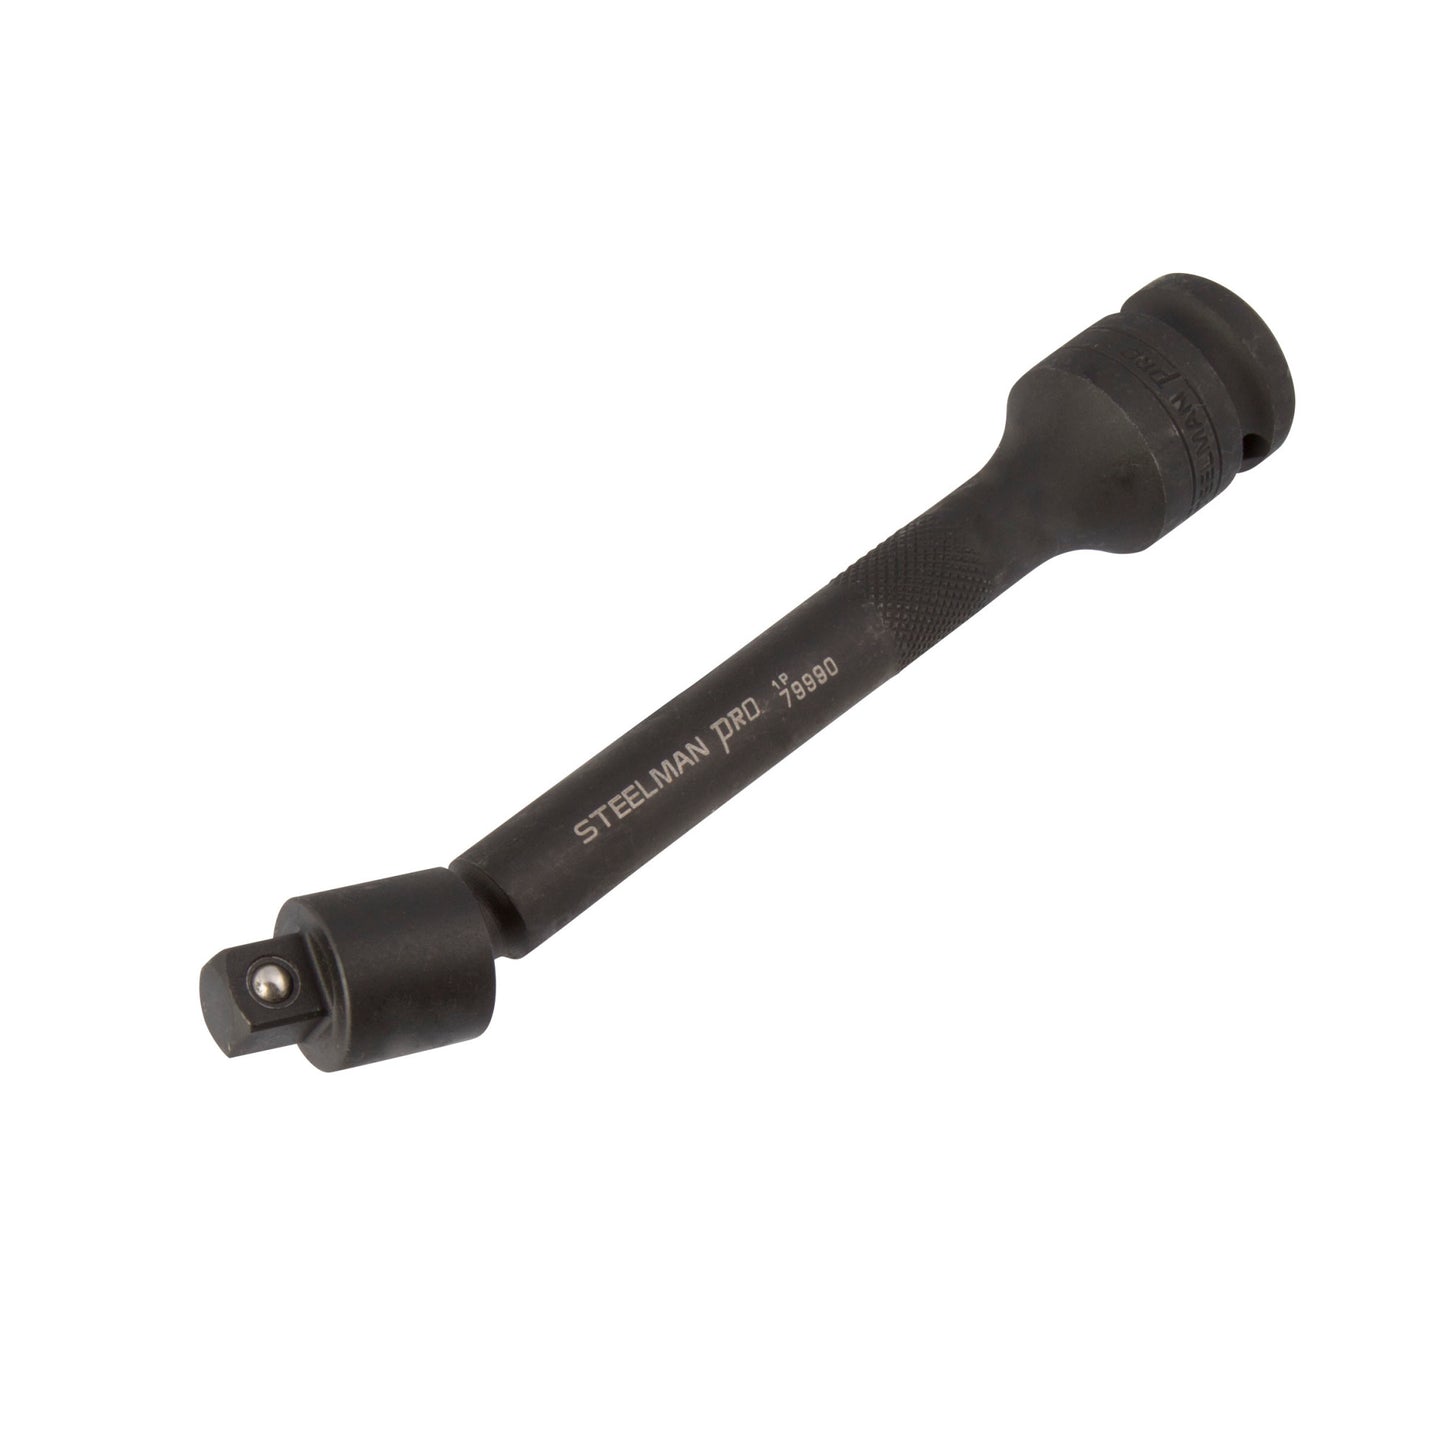 The 6-inch STEELMAN PRO 1/2-inch drive, 3/8-inch Pinless Extension is made from heat-treated chromoly steel.  The 1/2-inch female drive end accepts most sized power tools and the 3/8-inch male end accepts all types of 3/8-inch impact grade sockets